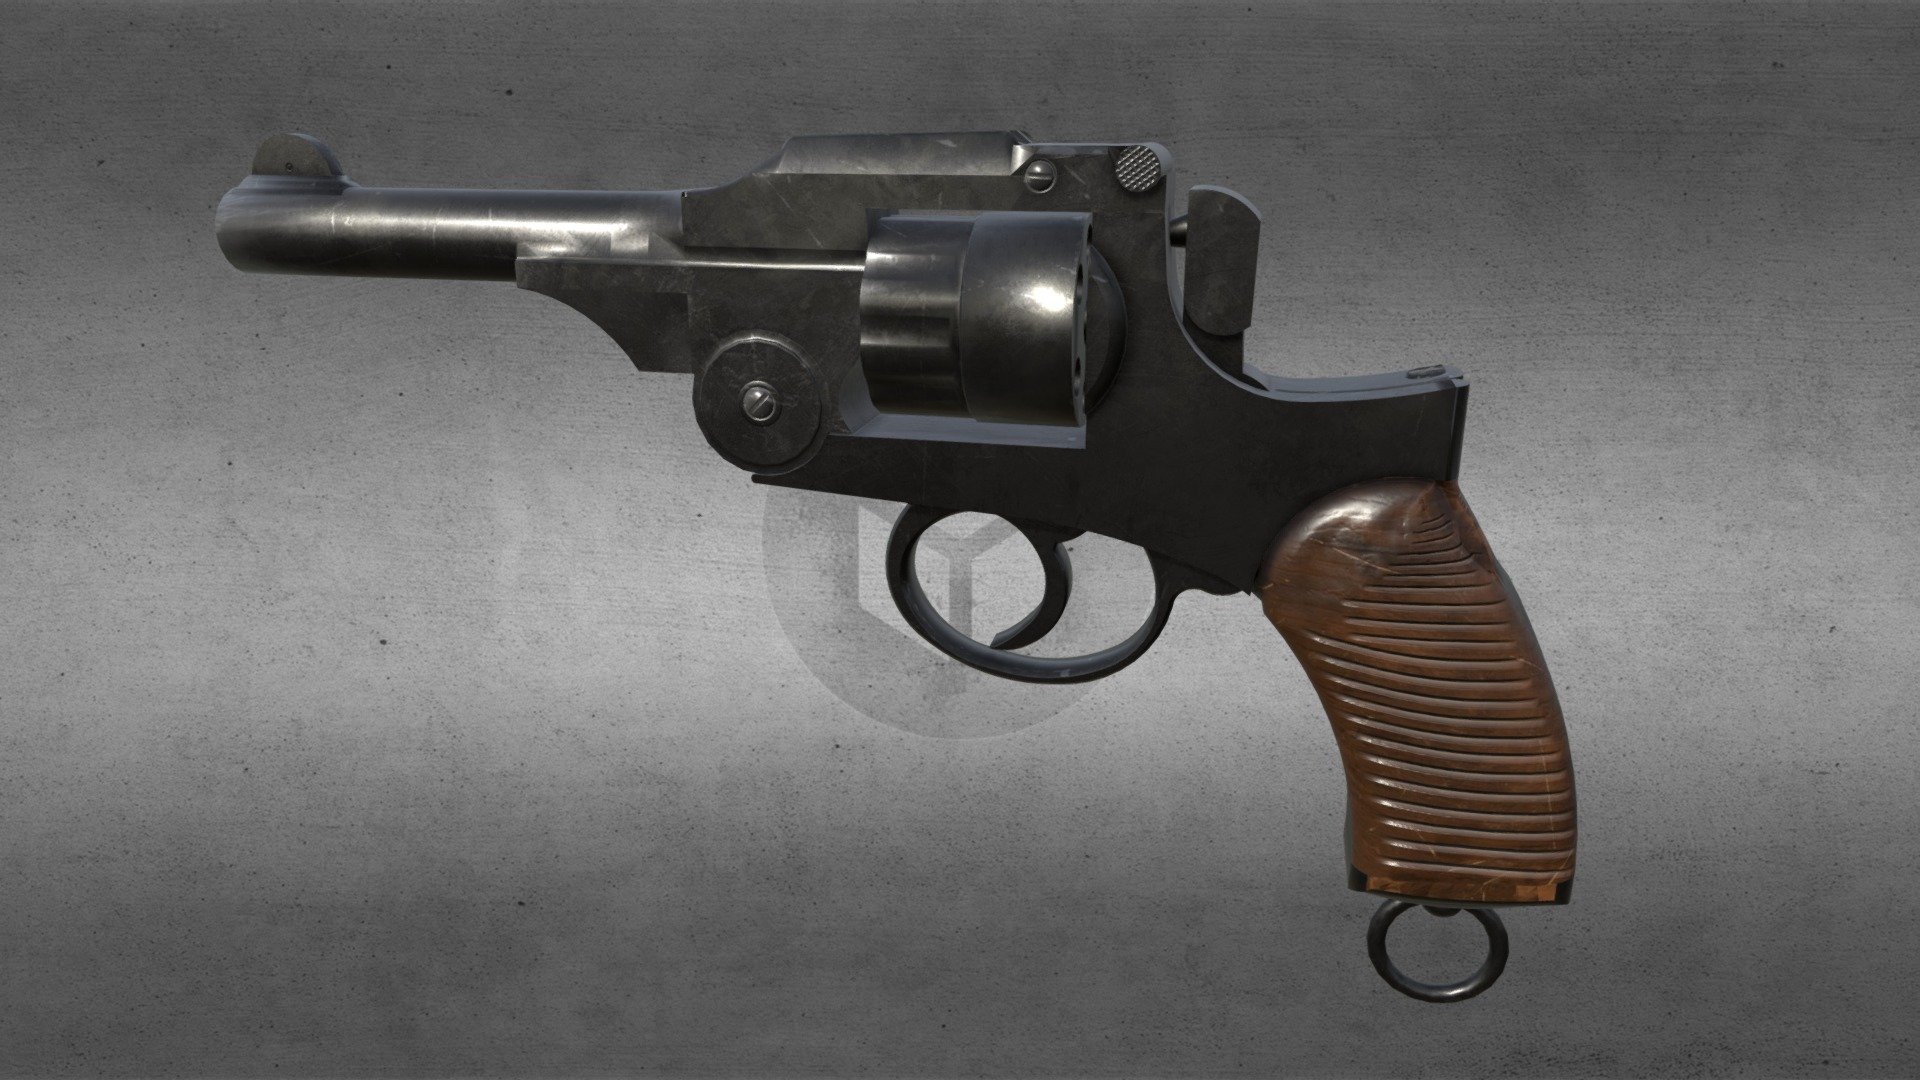 Made with Umodeler on the Unity Engine!

A Type 26 Japanese WW2 revolver. 

I made it for fun!

As you can see, i am no expert on texturing. Perhaps i might update the model with better textures - Type 26 Revolver - 3D model by Snijboer 3d model